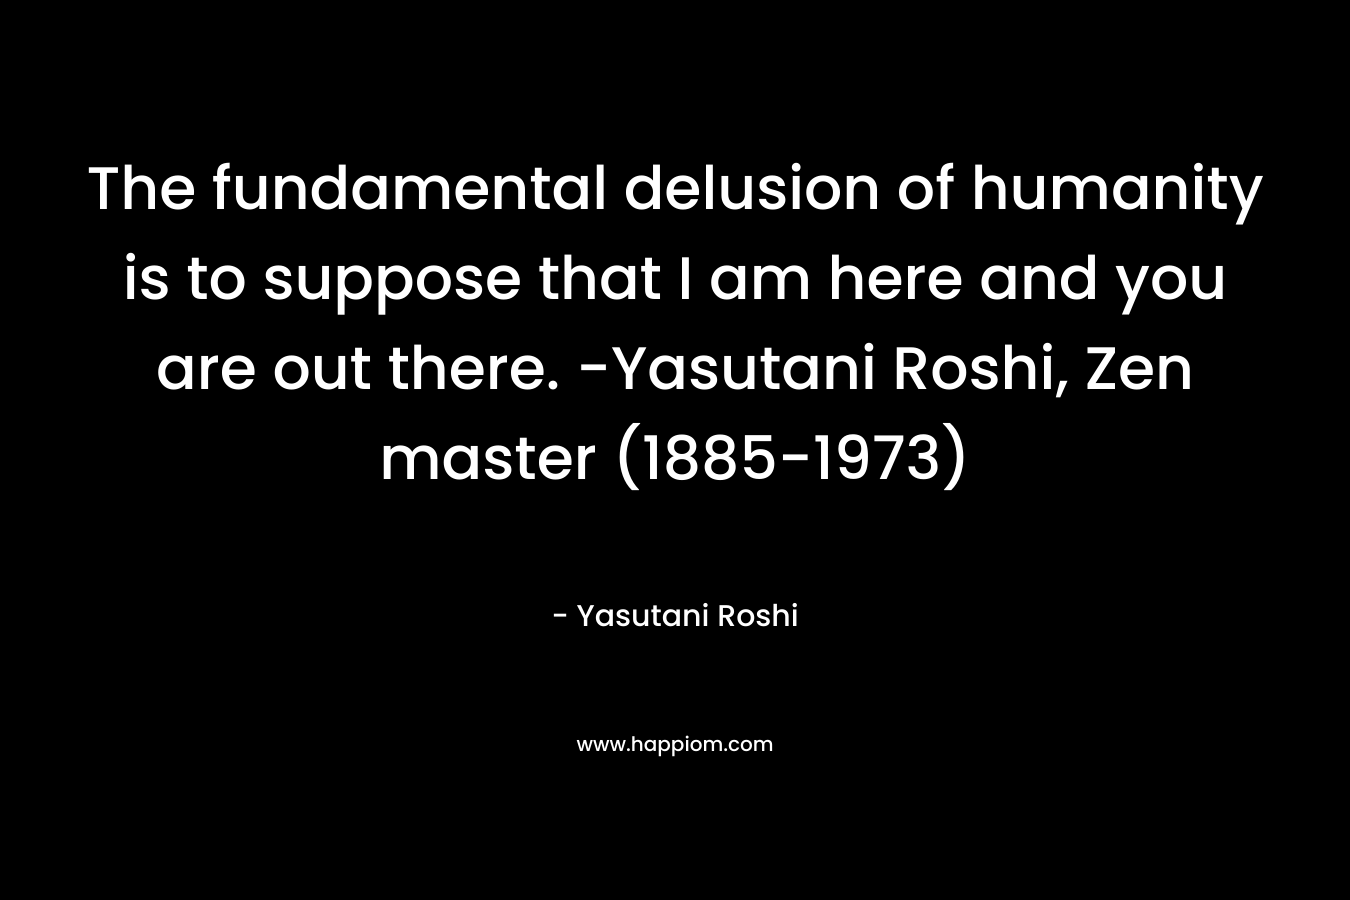 The fundamental delusion of humanity is to suppose that I am here and you are out there. -Yasutani Roshi, Zen master (1885-1973)